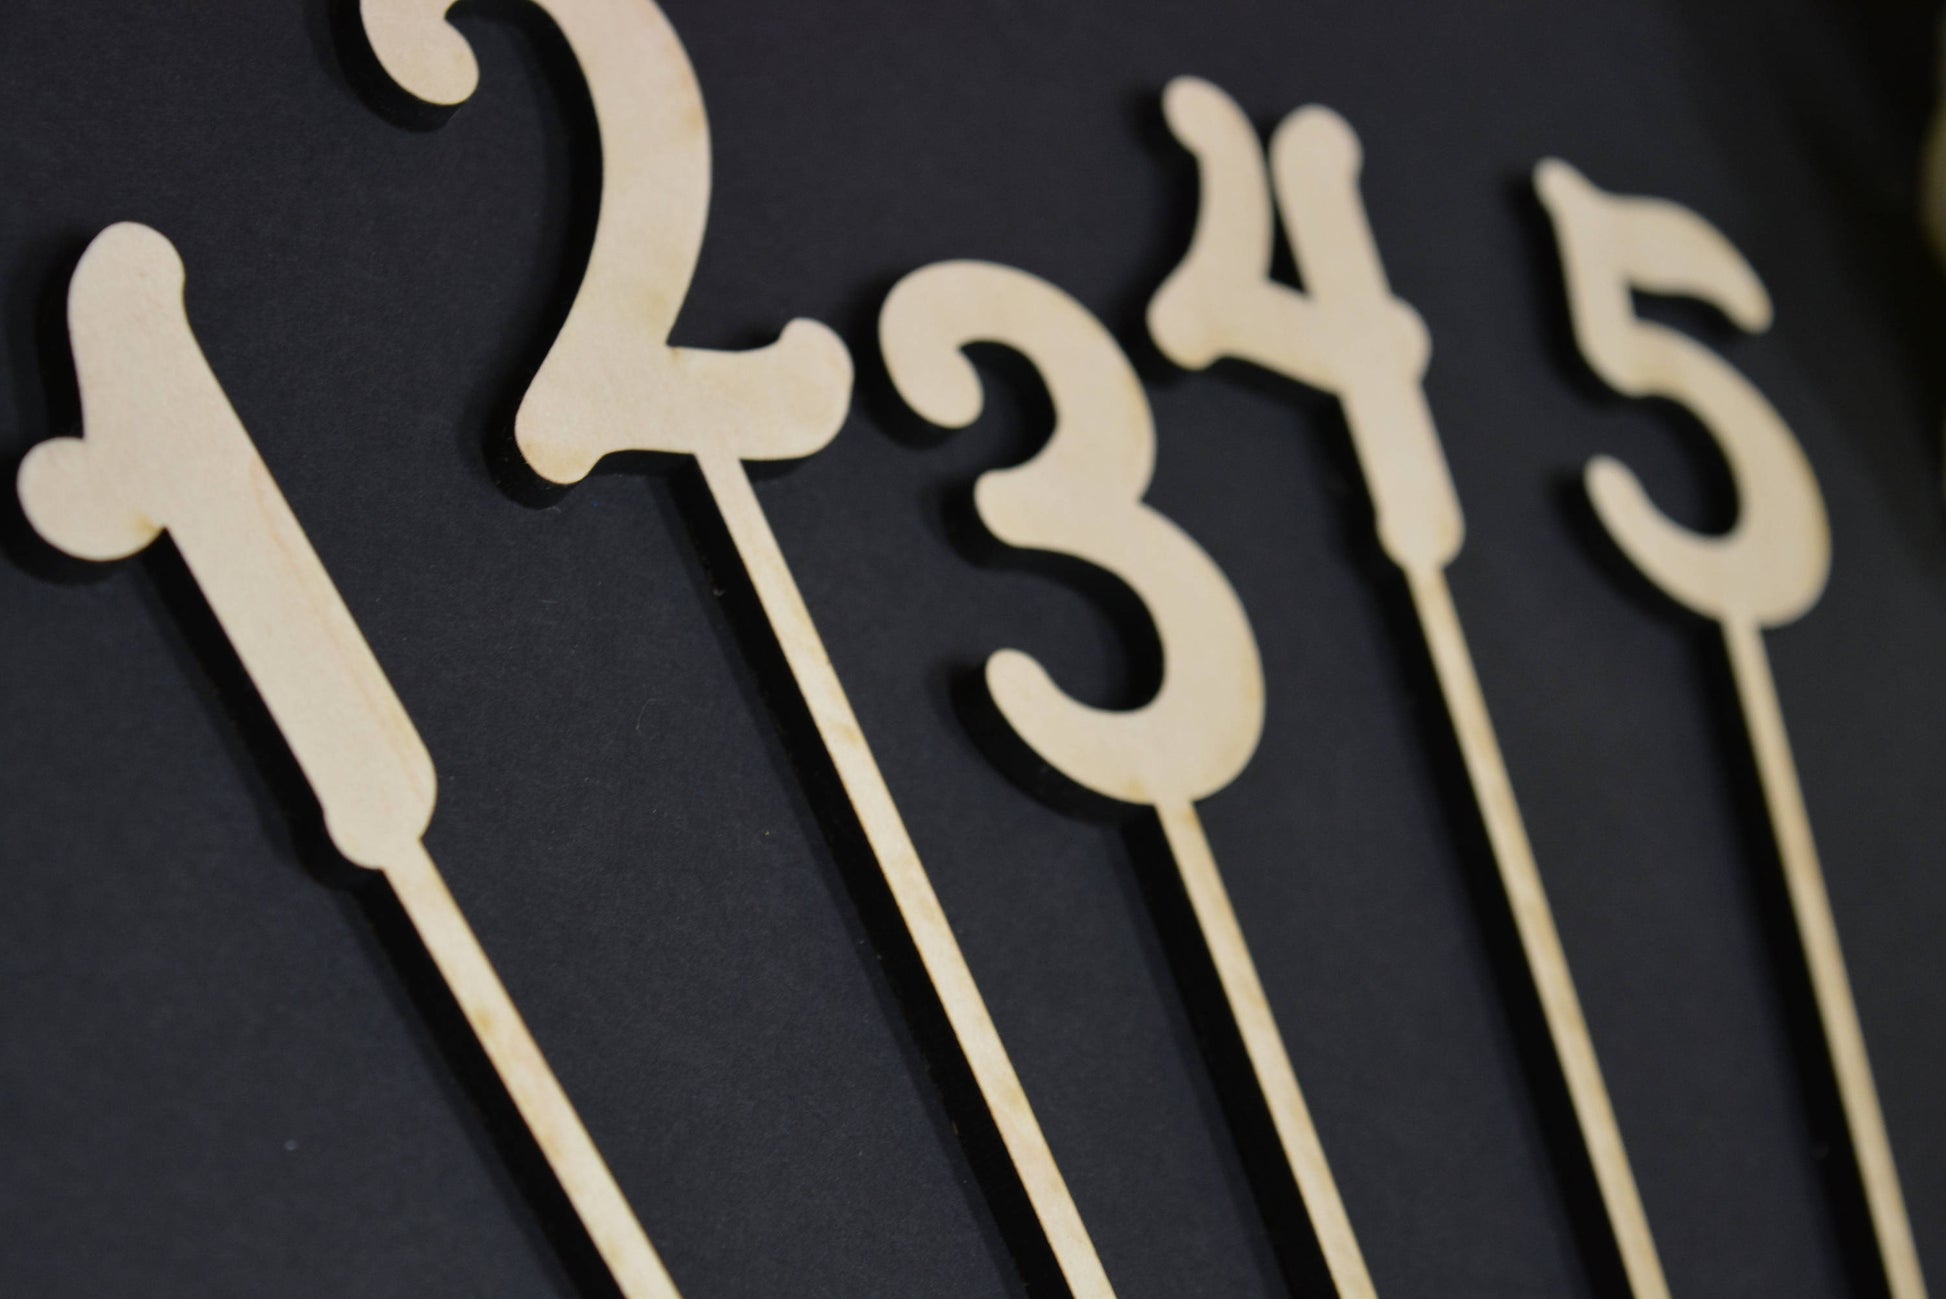 Wedding Table Numbers on sticks / attached stakes. Wooden Table Numbers. Rustic Table Numbers. Party Table Numbers. Wood Numbers with stake